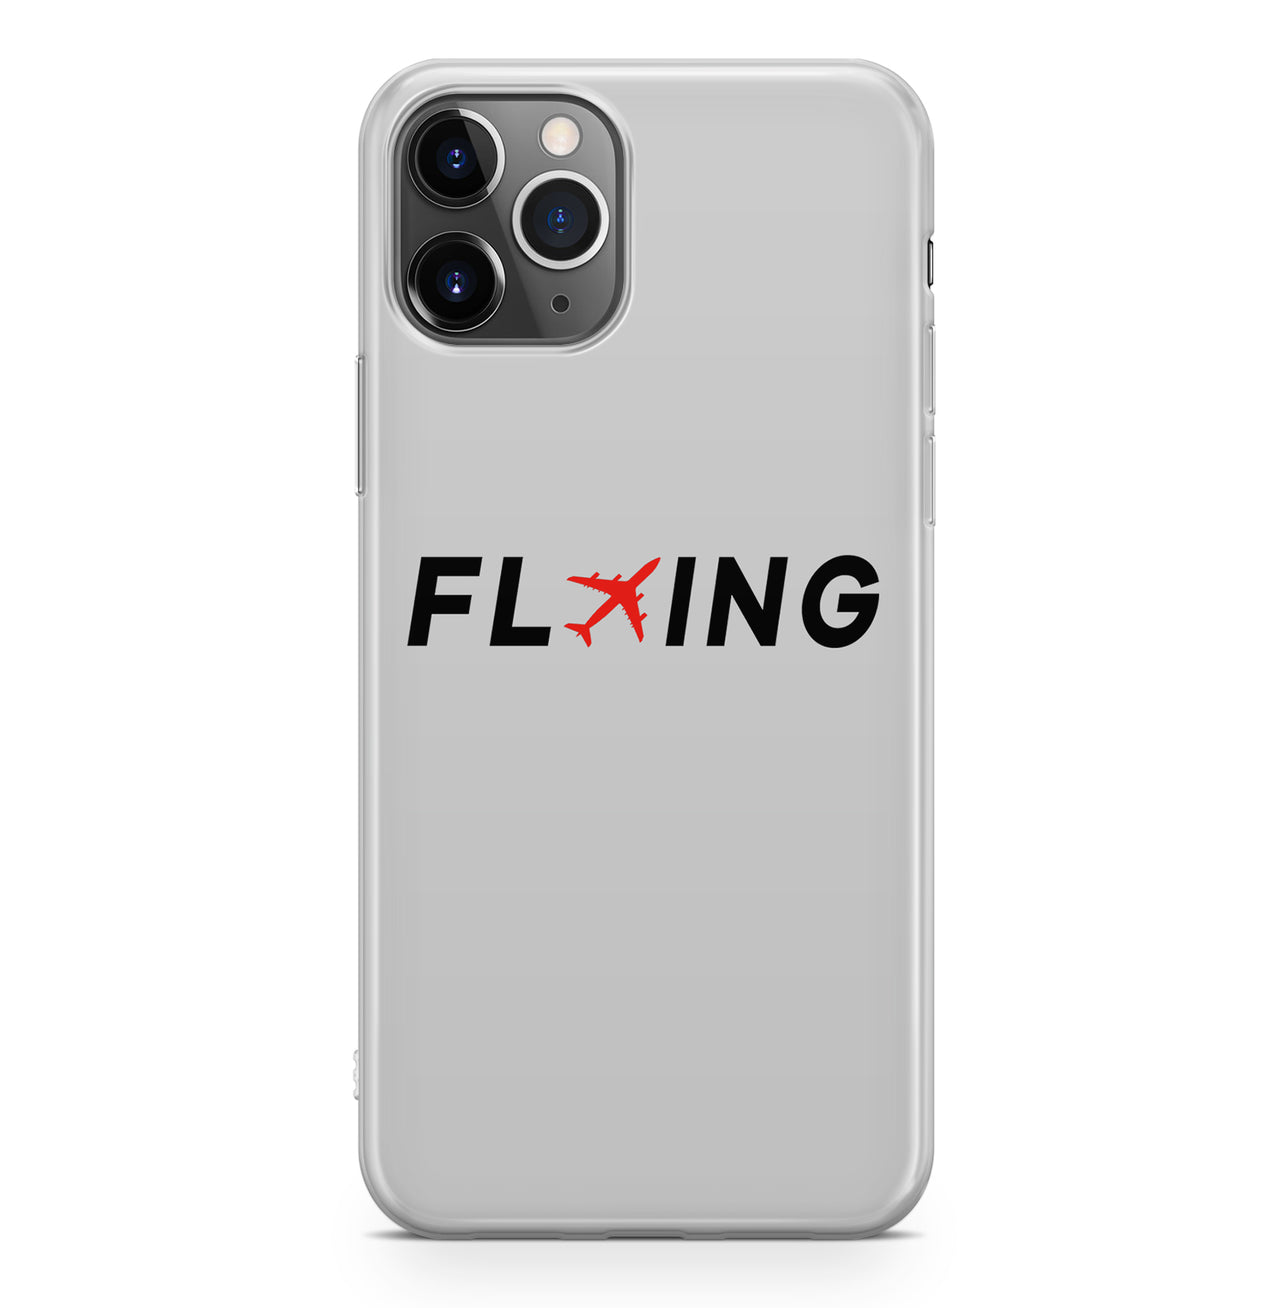 Flying Designed iPhone Cases